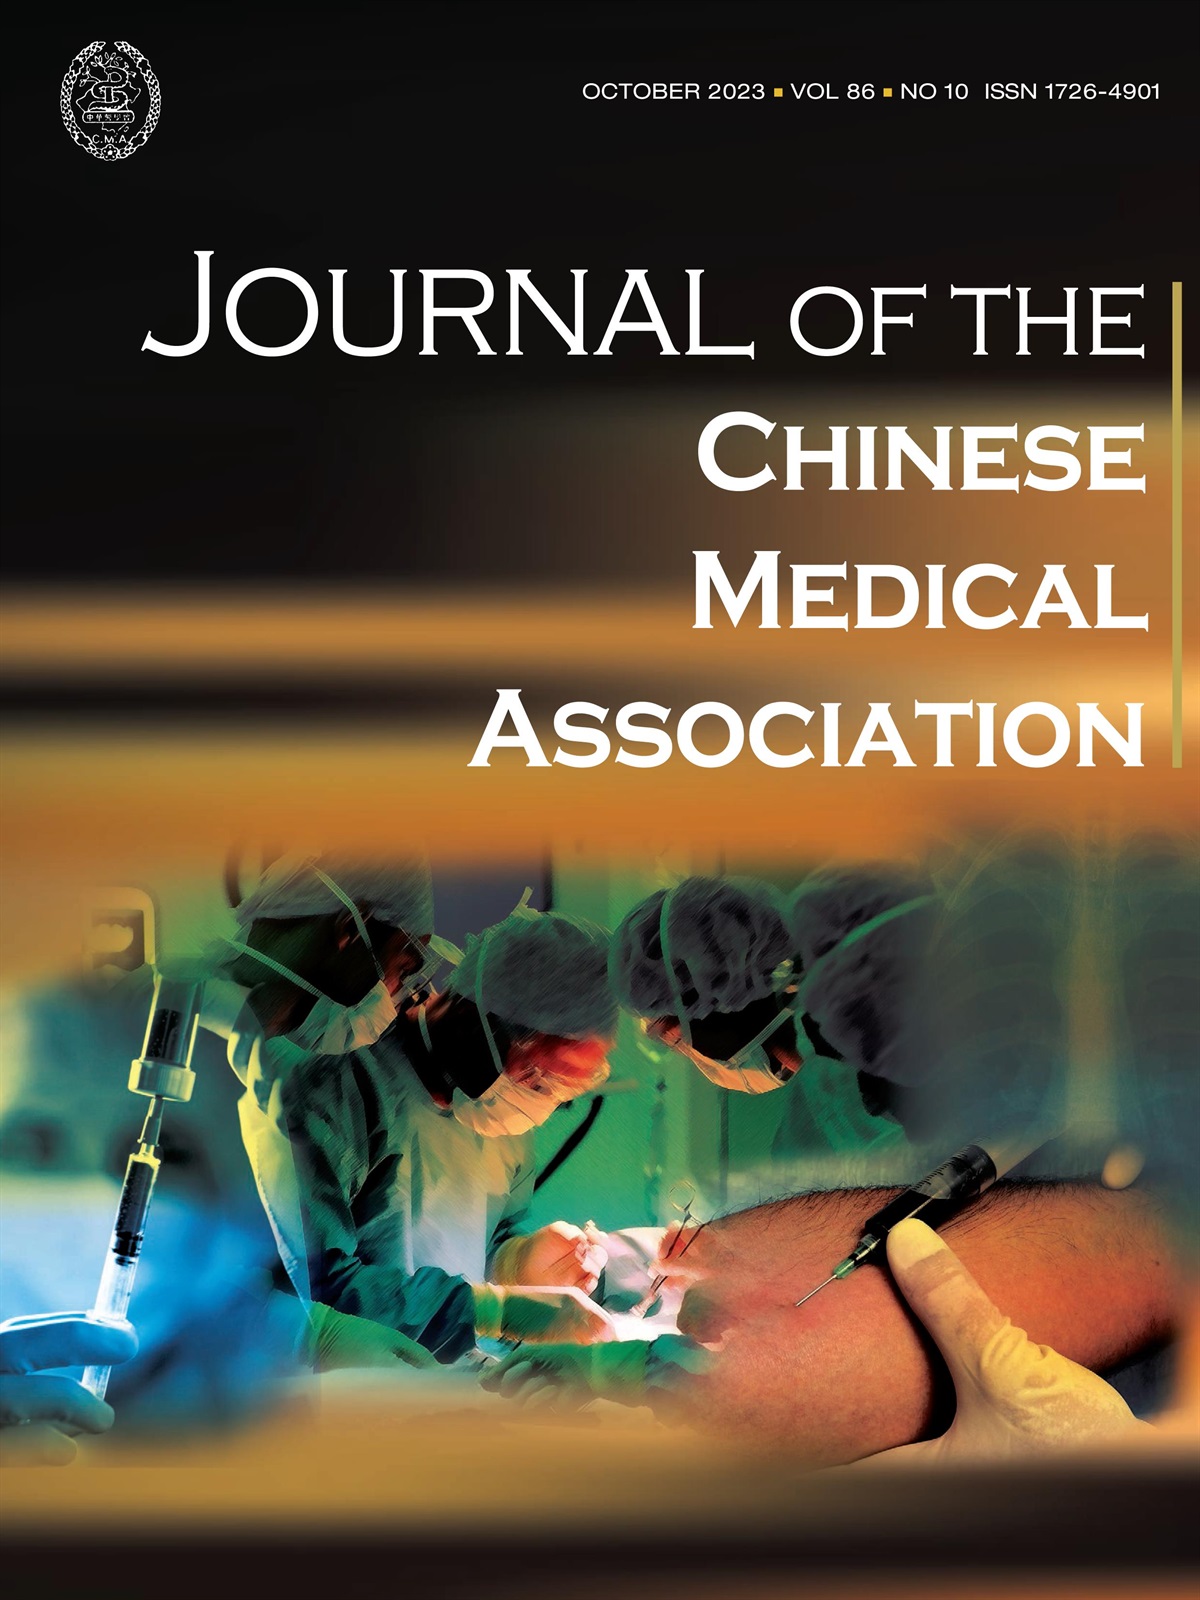 The 2022 Journal of Chinese Medical Association Award-Winning Research illuminates the promise of integrating acupuncture and related techniques in rheumatoid arthritis treatment